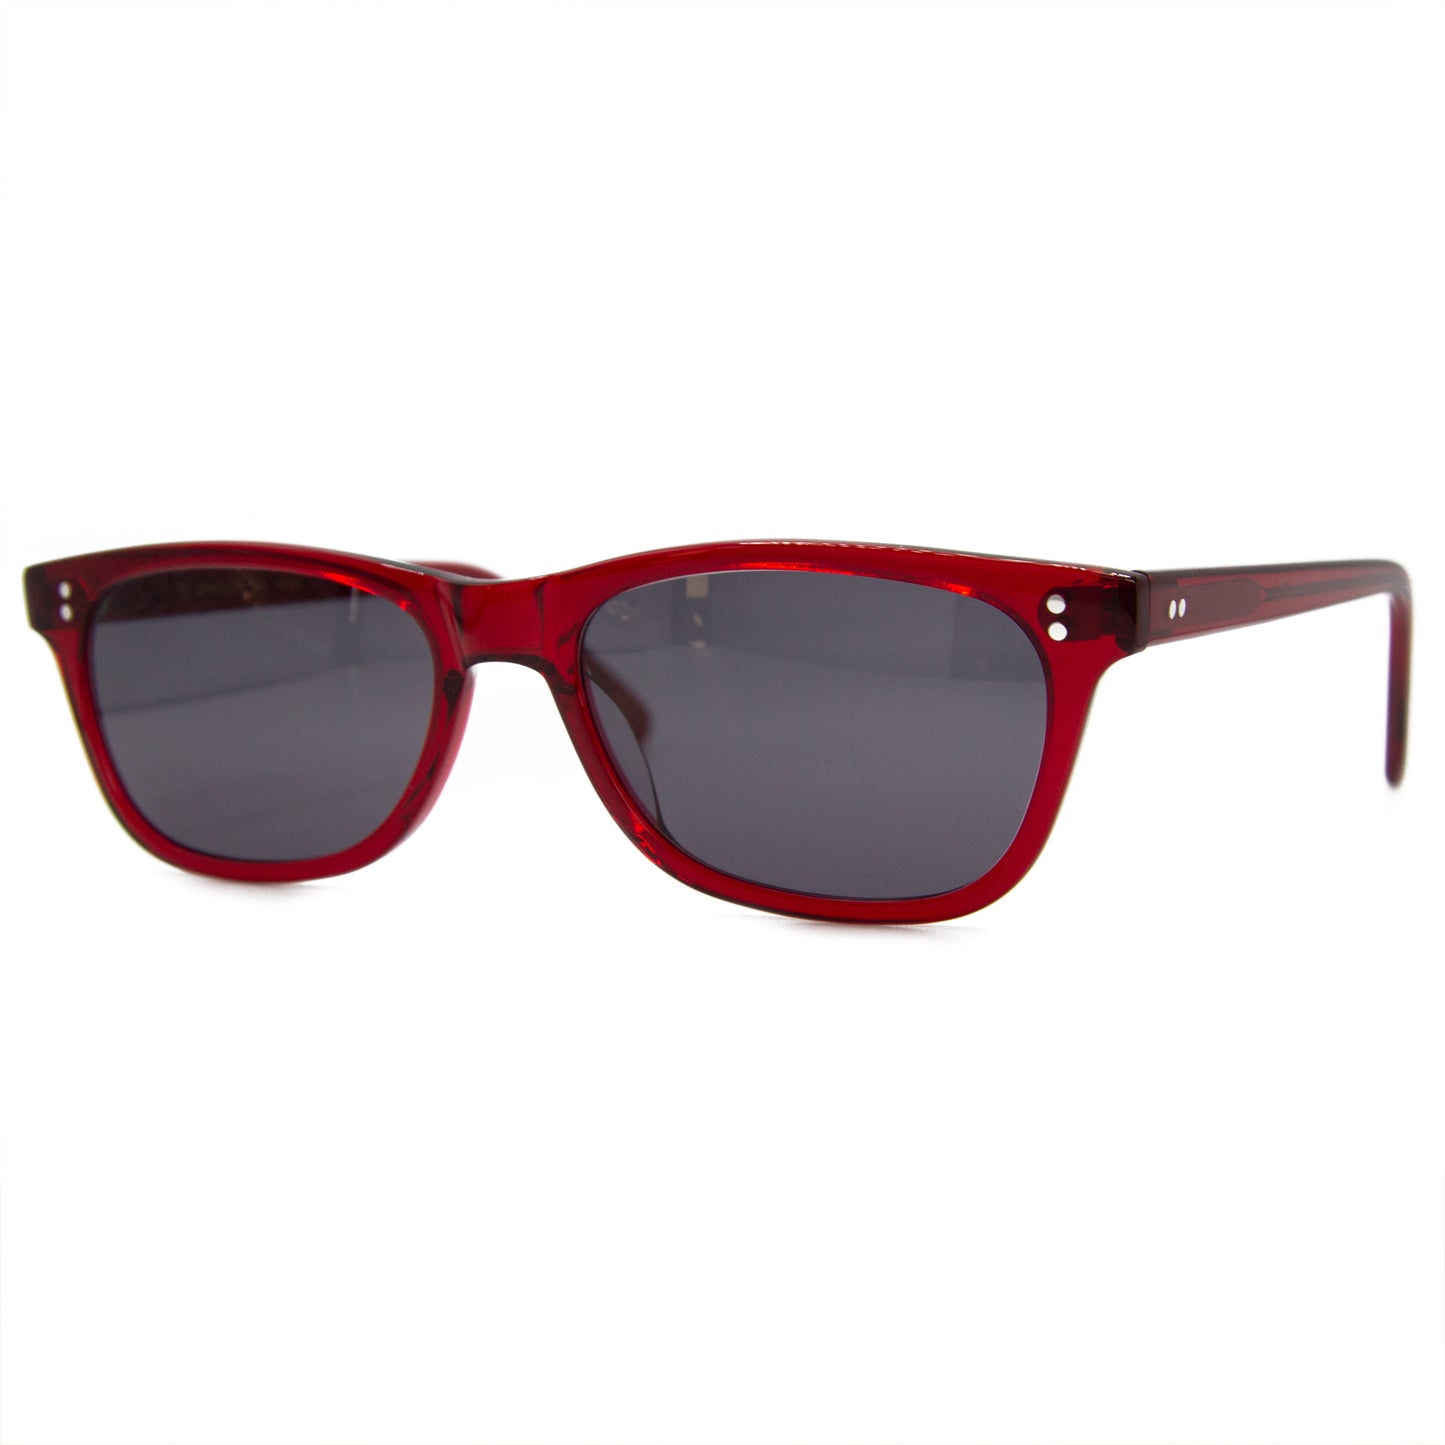 3 brothers - Mish - Red - Prescription Sunglasses - Side